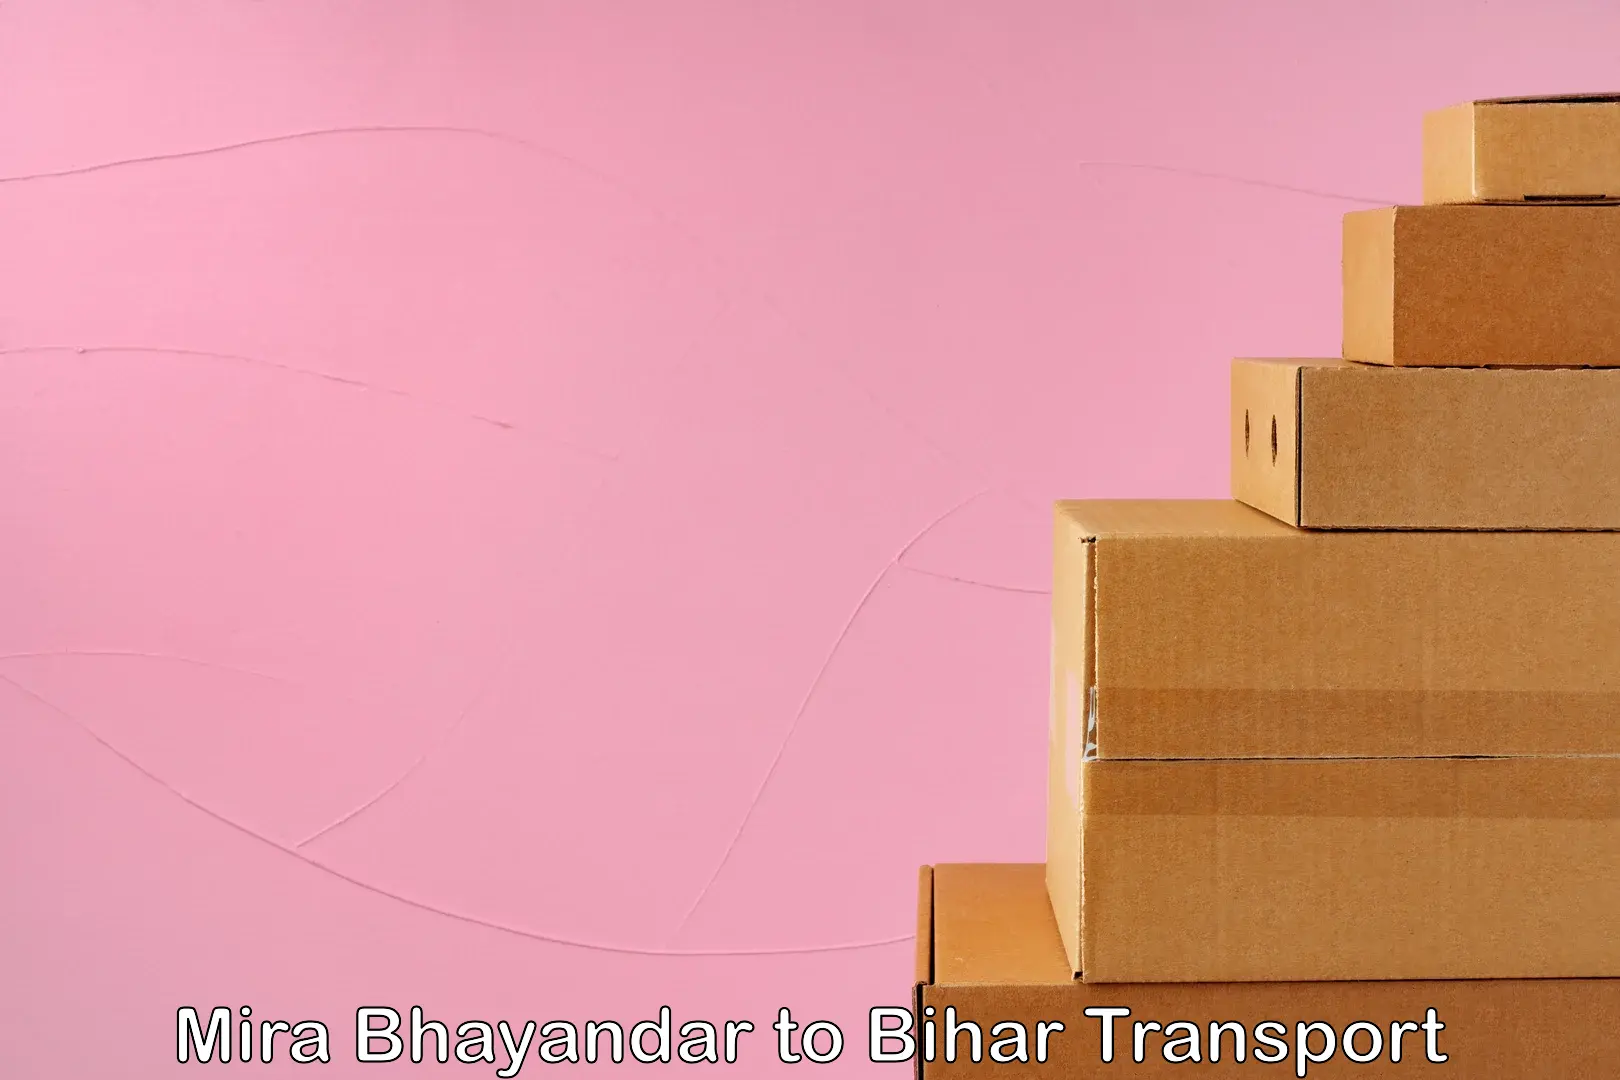 Goods delivery service Mira Bhayandar to Sirdala